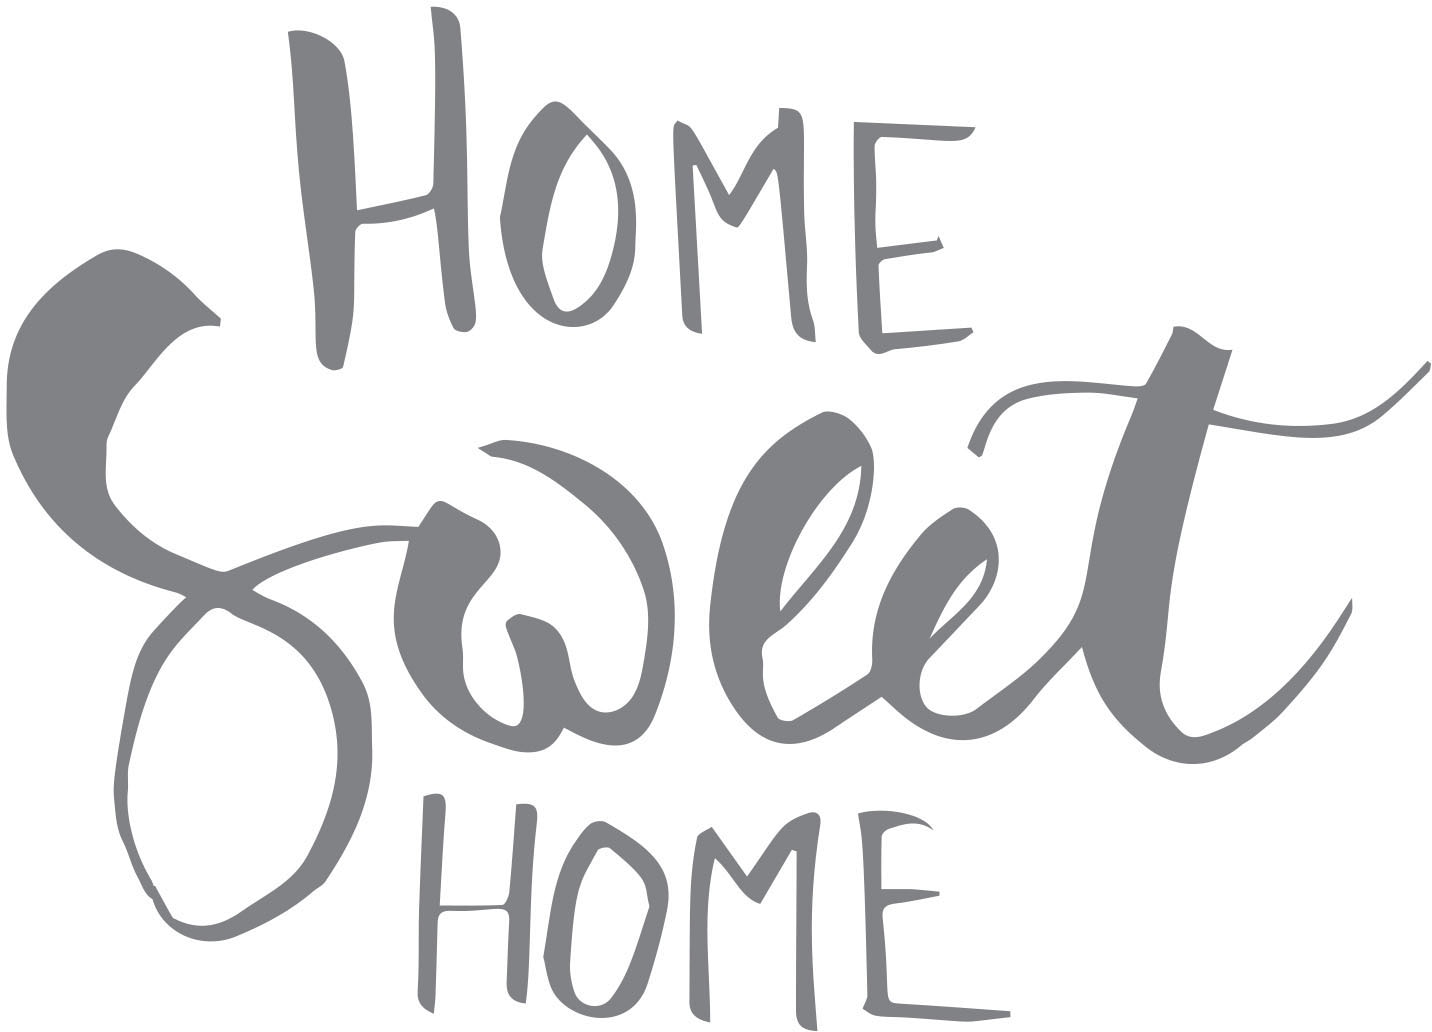 queence Wandtattoo »HOME SWEET HOME«, (1 St.) bequem kaufen